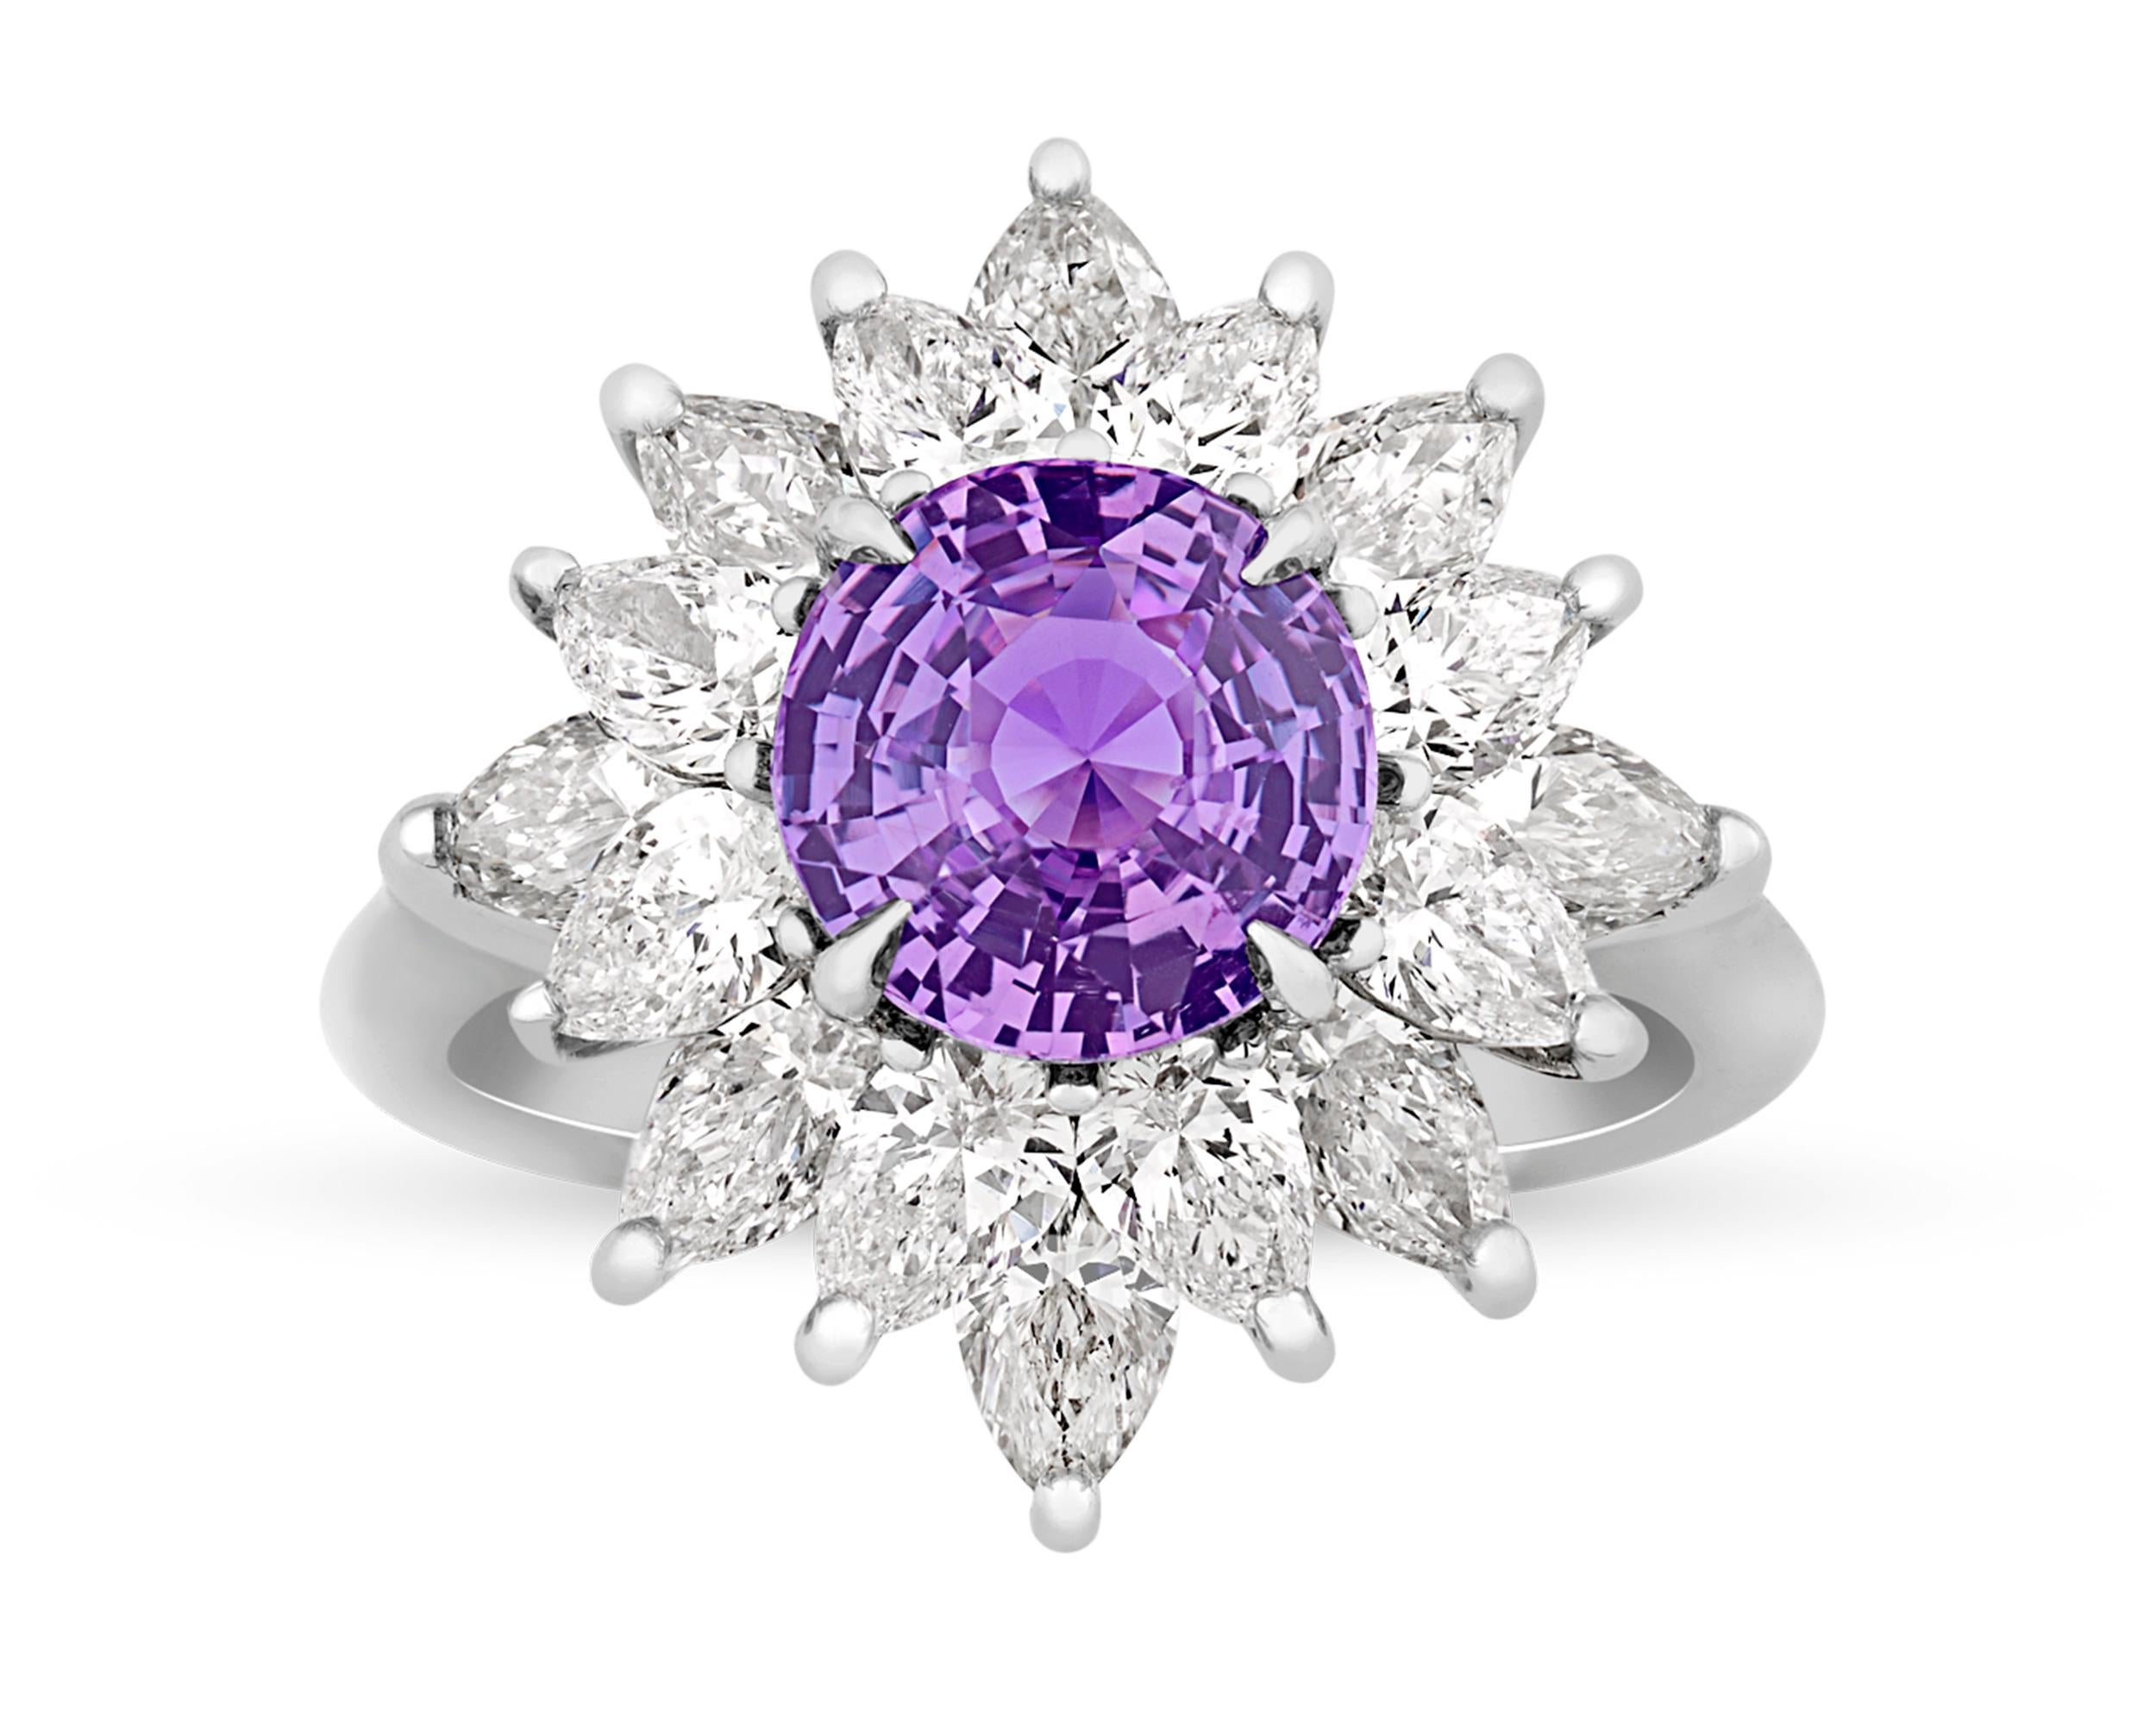 An untreated purple sapphire weighing 2.53 carats displays its celebrated violet hue in this remarkable ring. Purple sapphires stand among the most sought-after colored gemstones and are highly treasured among gem collectors. This example is